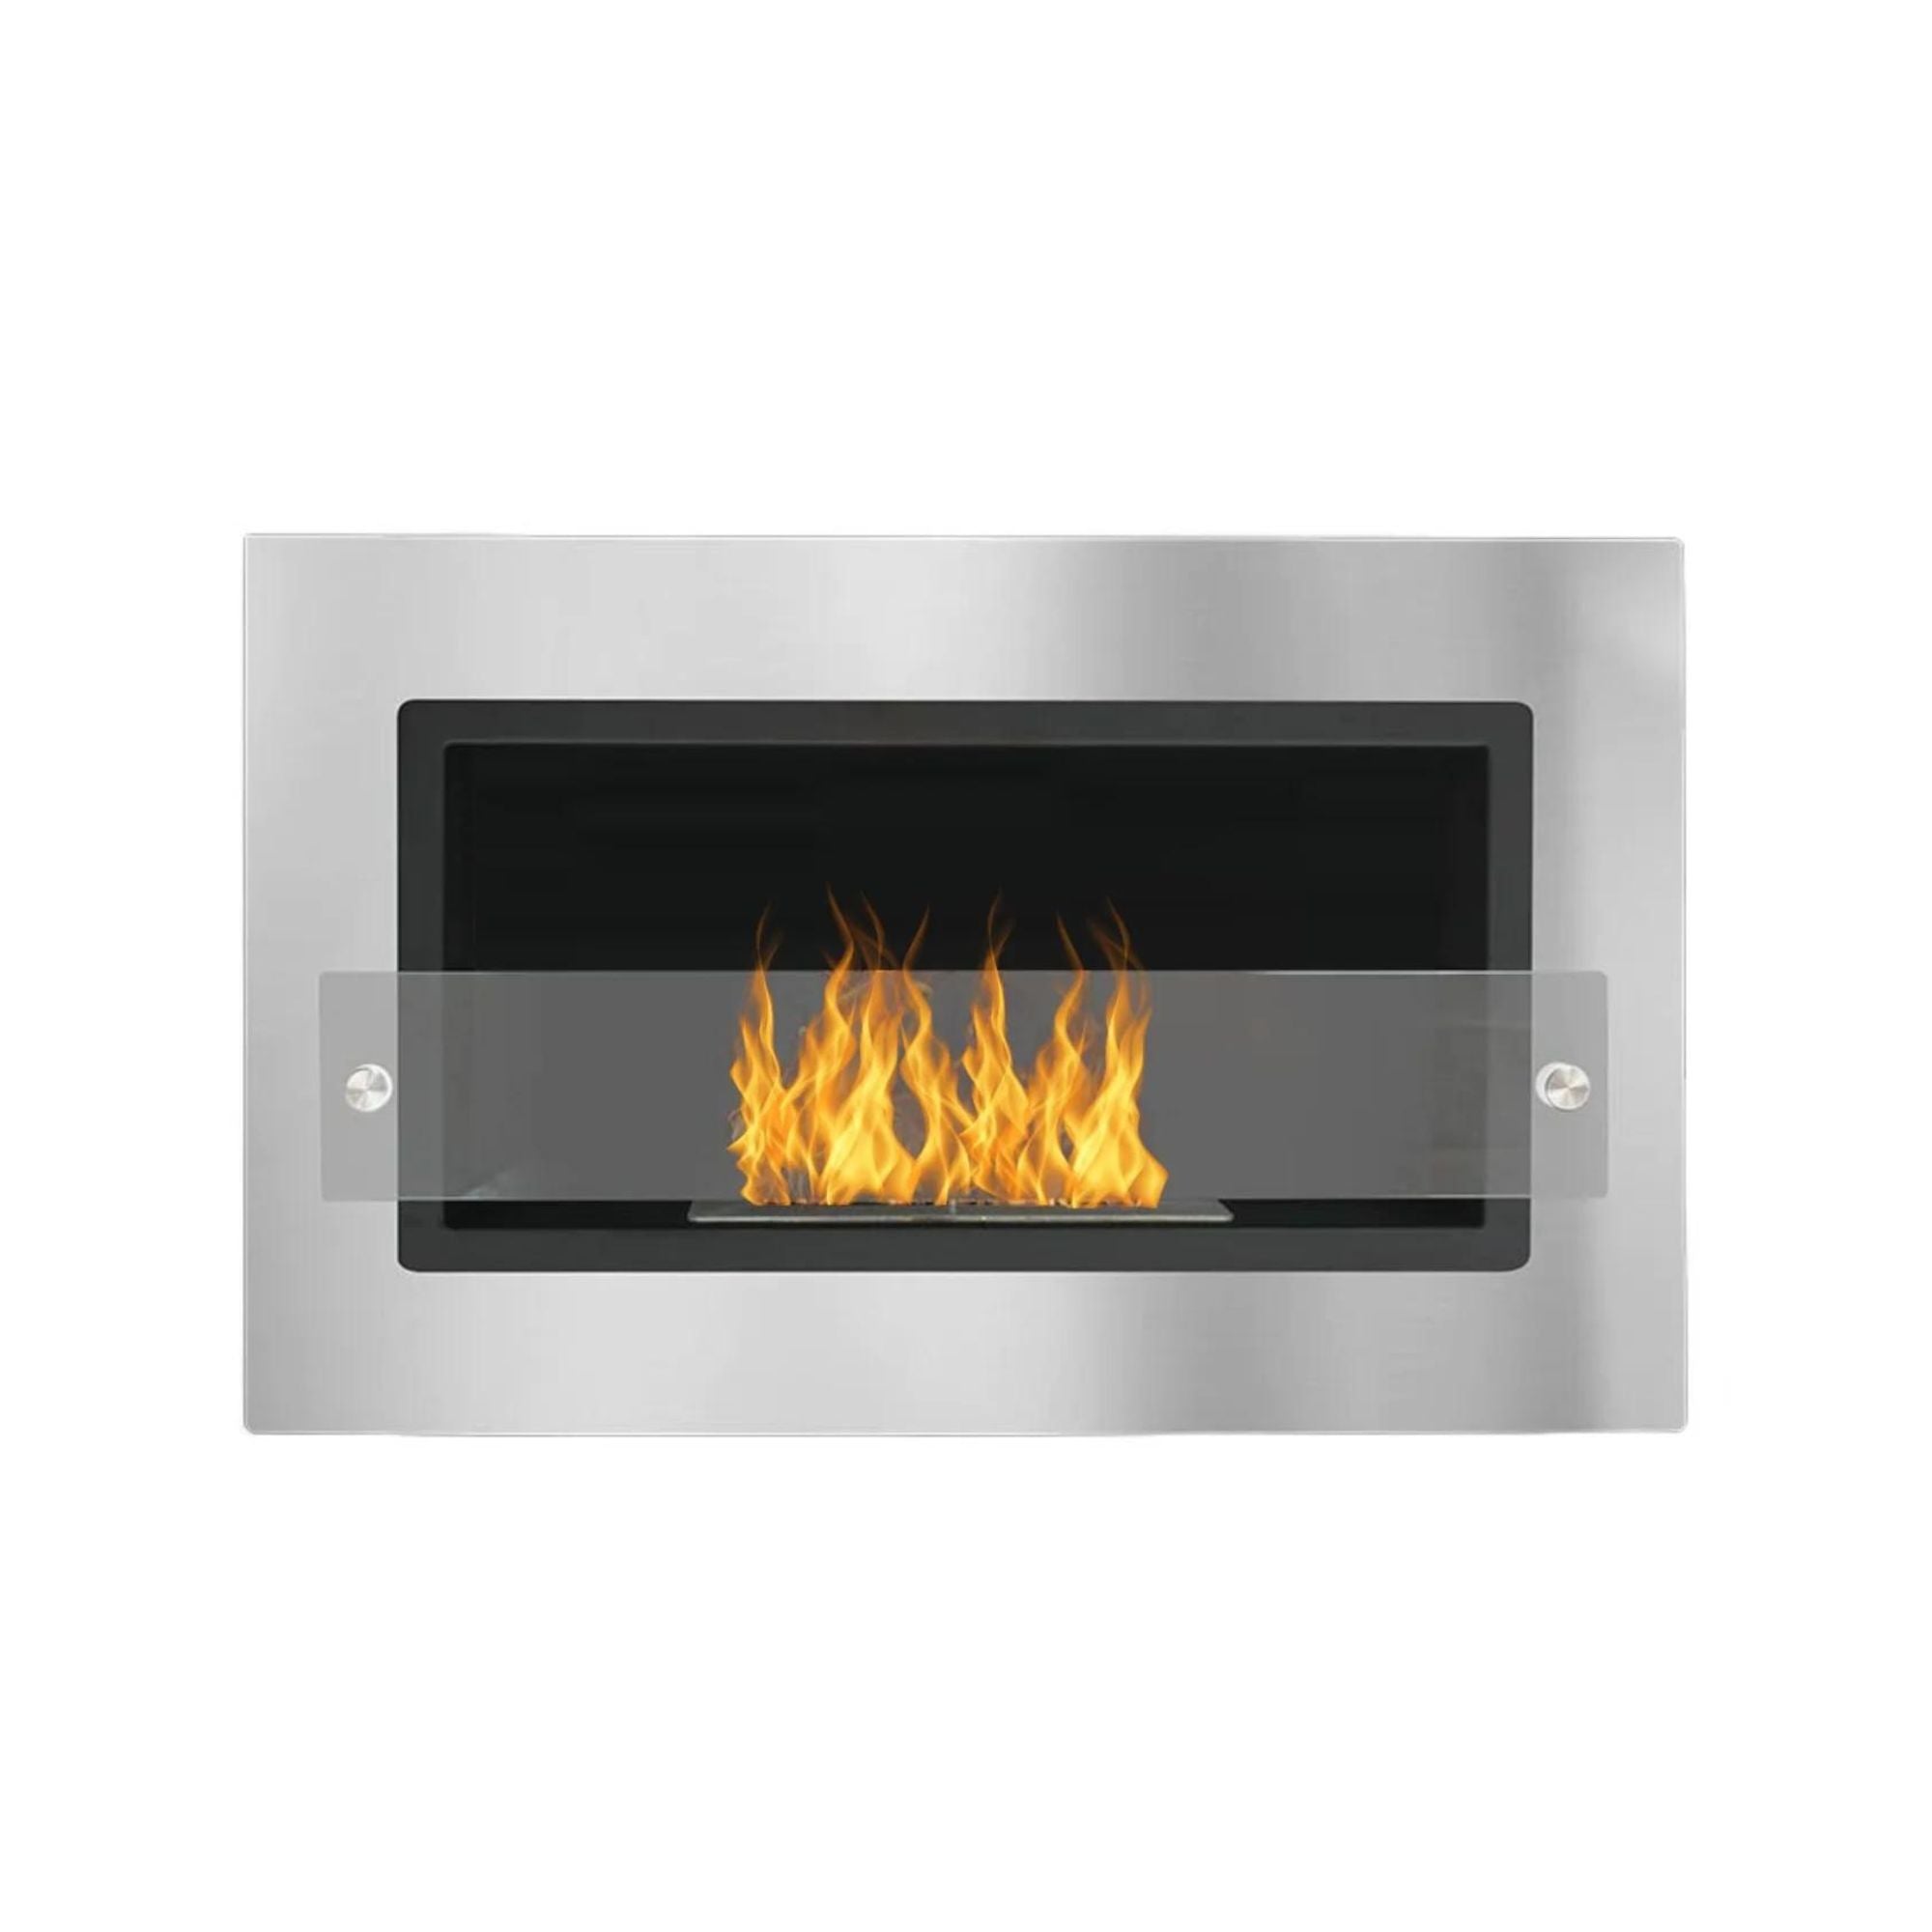 Bio Ethanol Built-in Fireplace - Wall Fireplace Stainless Steel With Glass 64 cm 